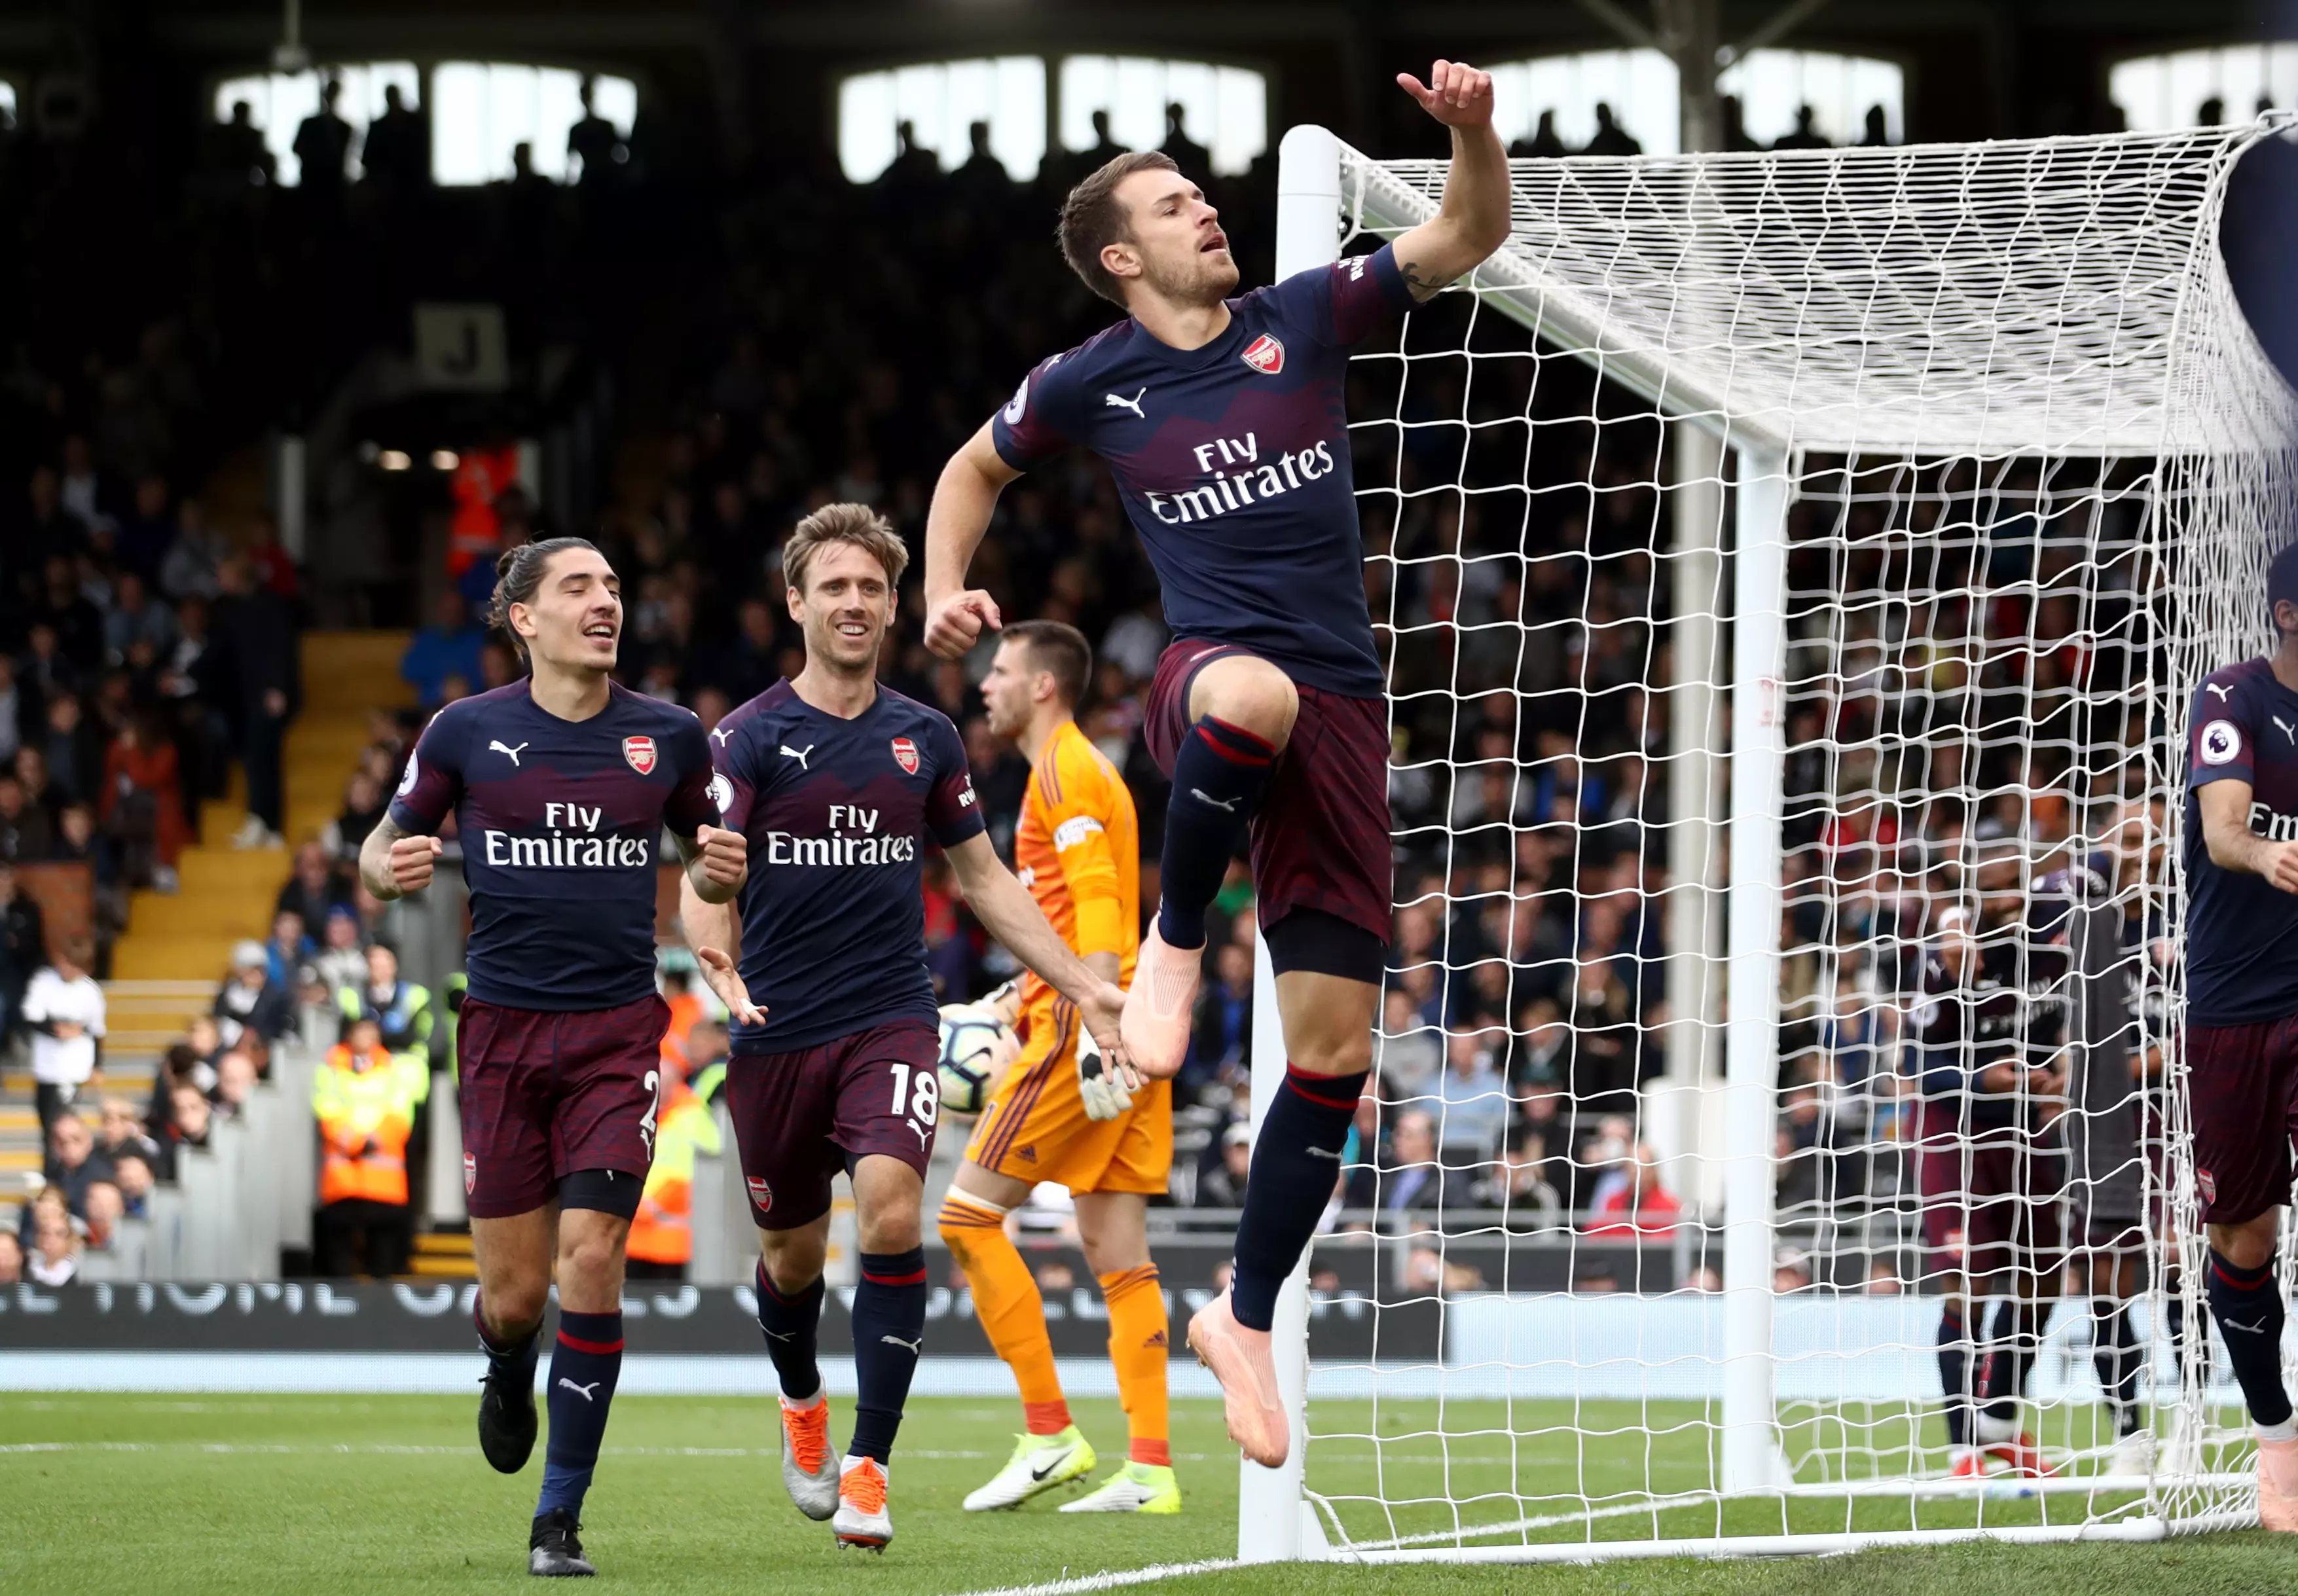 Ramsey finished off a great team move against Fulham. Image: PA Images